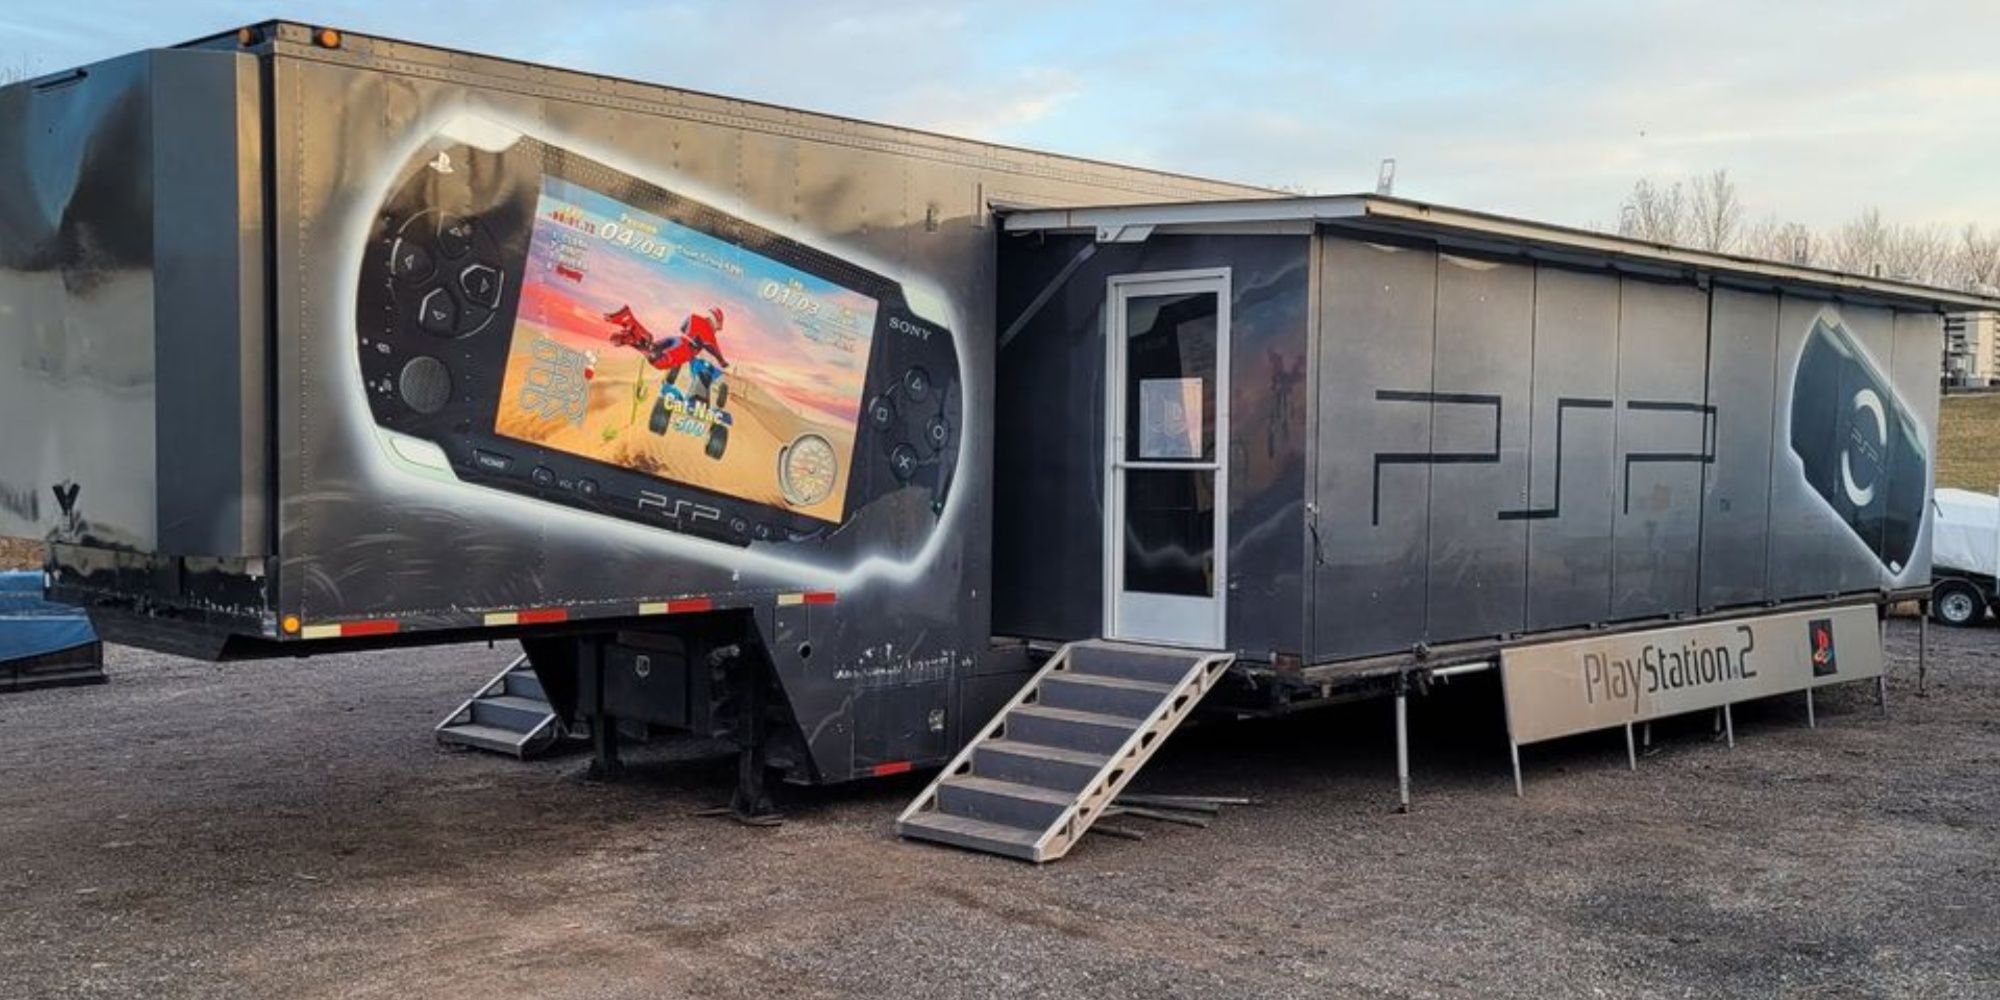 the psp and ps2 playstation experience truck